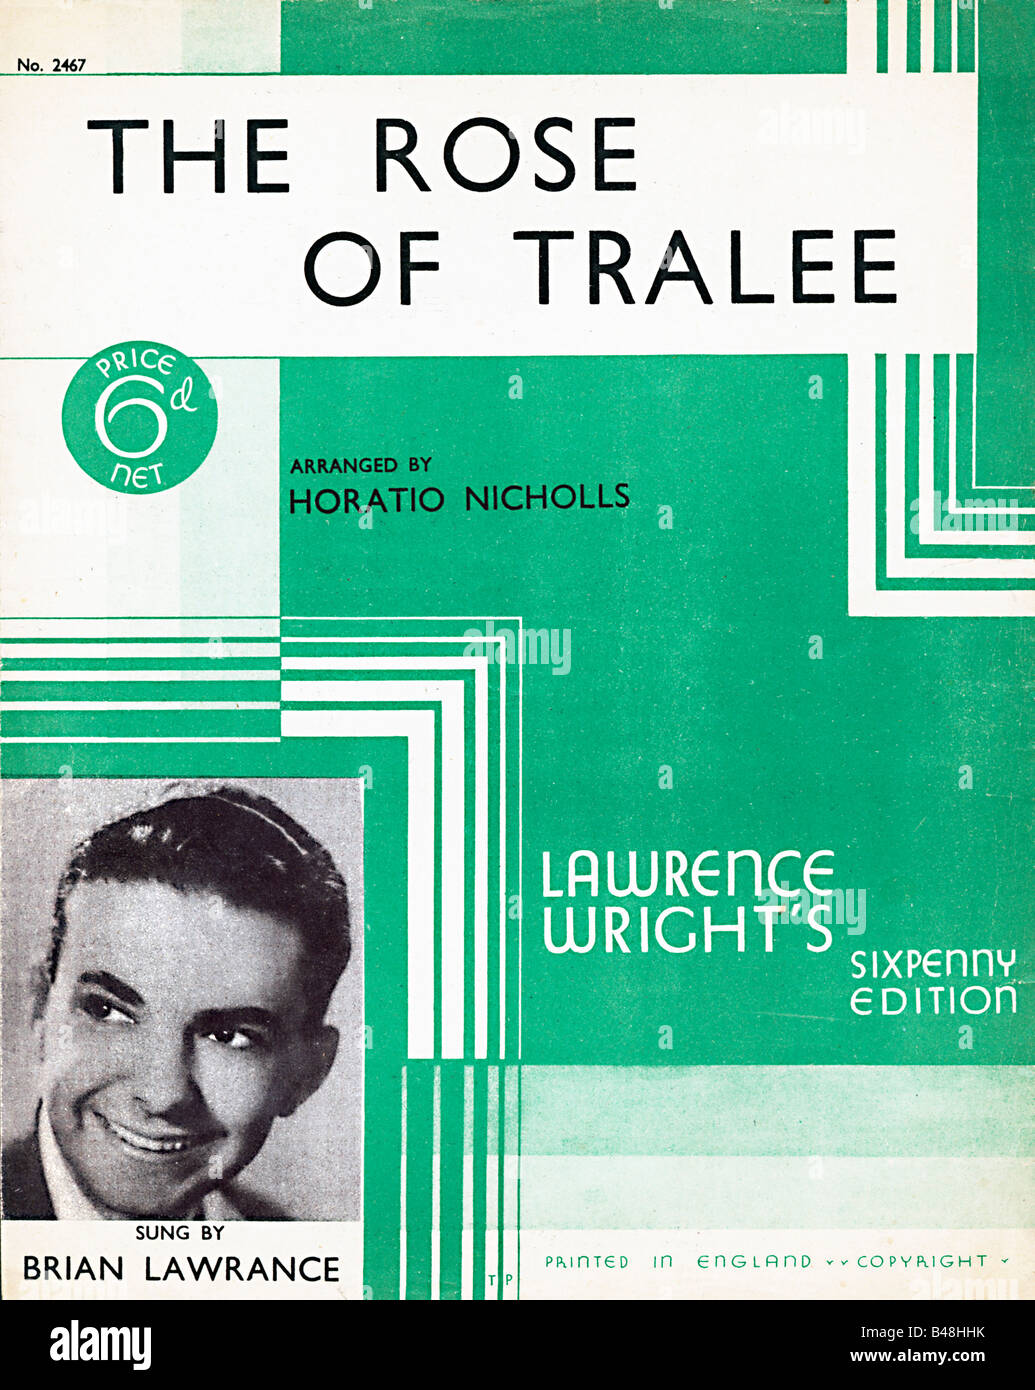 Rose of Tralee music sheet cover for a 1939 version of the traditional Irish ballad sung by Brian Lawrence Stock Photo